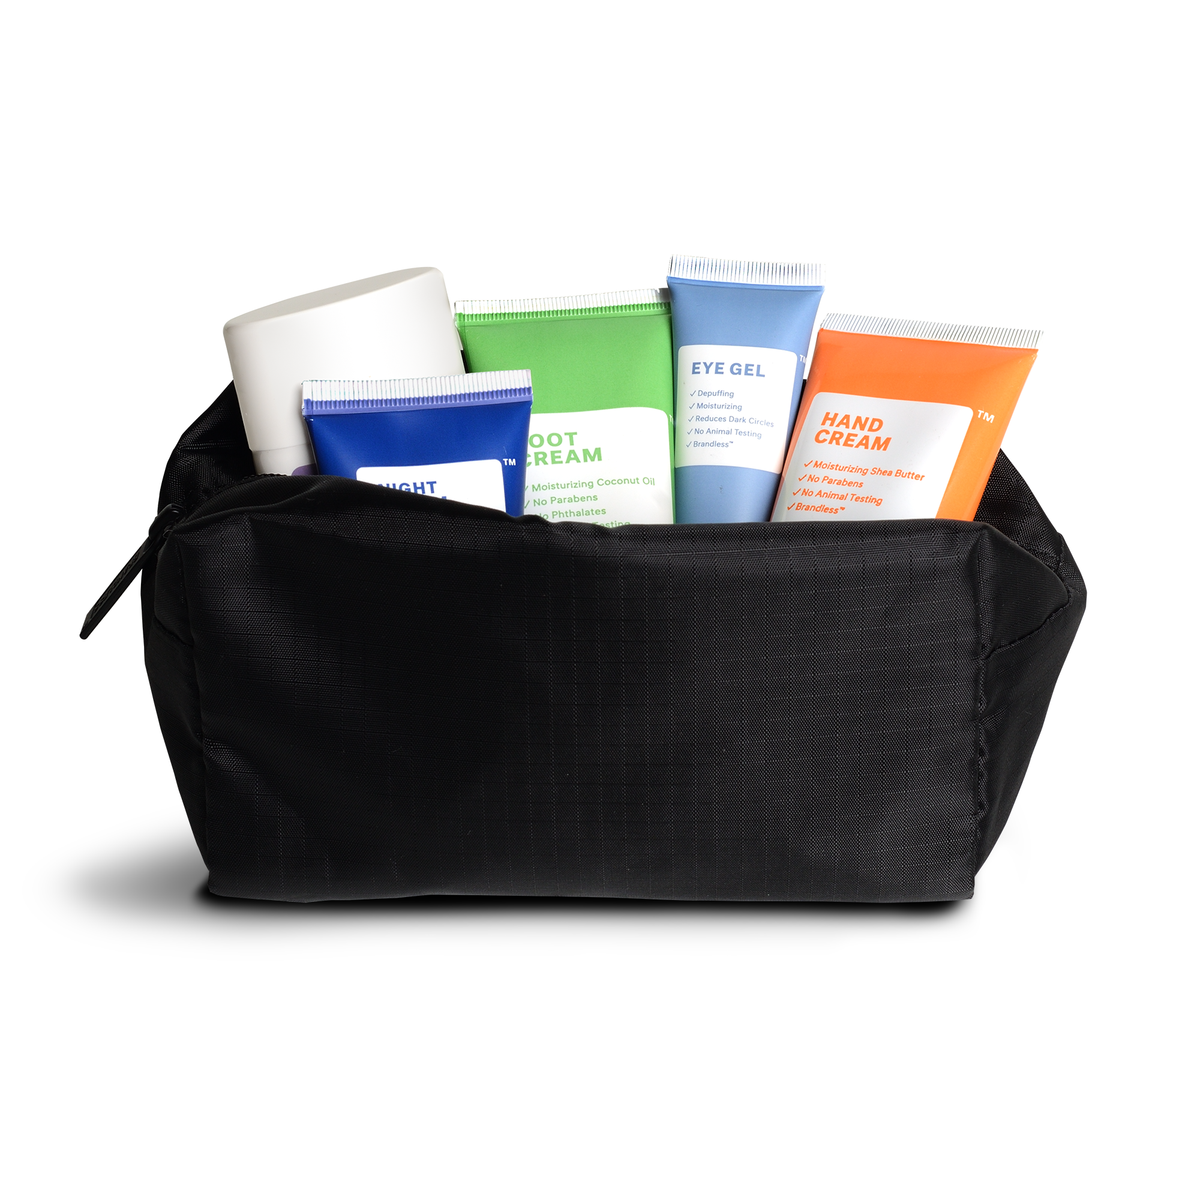 Lifestyle.  Side view of travel pouch, zipped open, showing 5 different brandlesss personal care items poling out the top, demonstrating the large storage capacity of the bag.